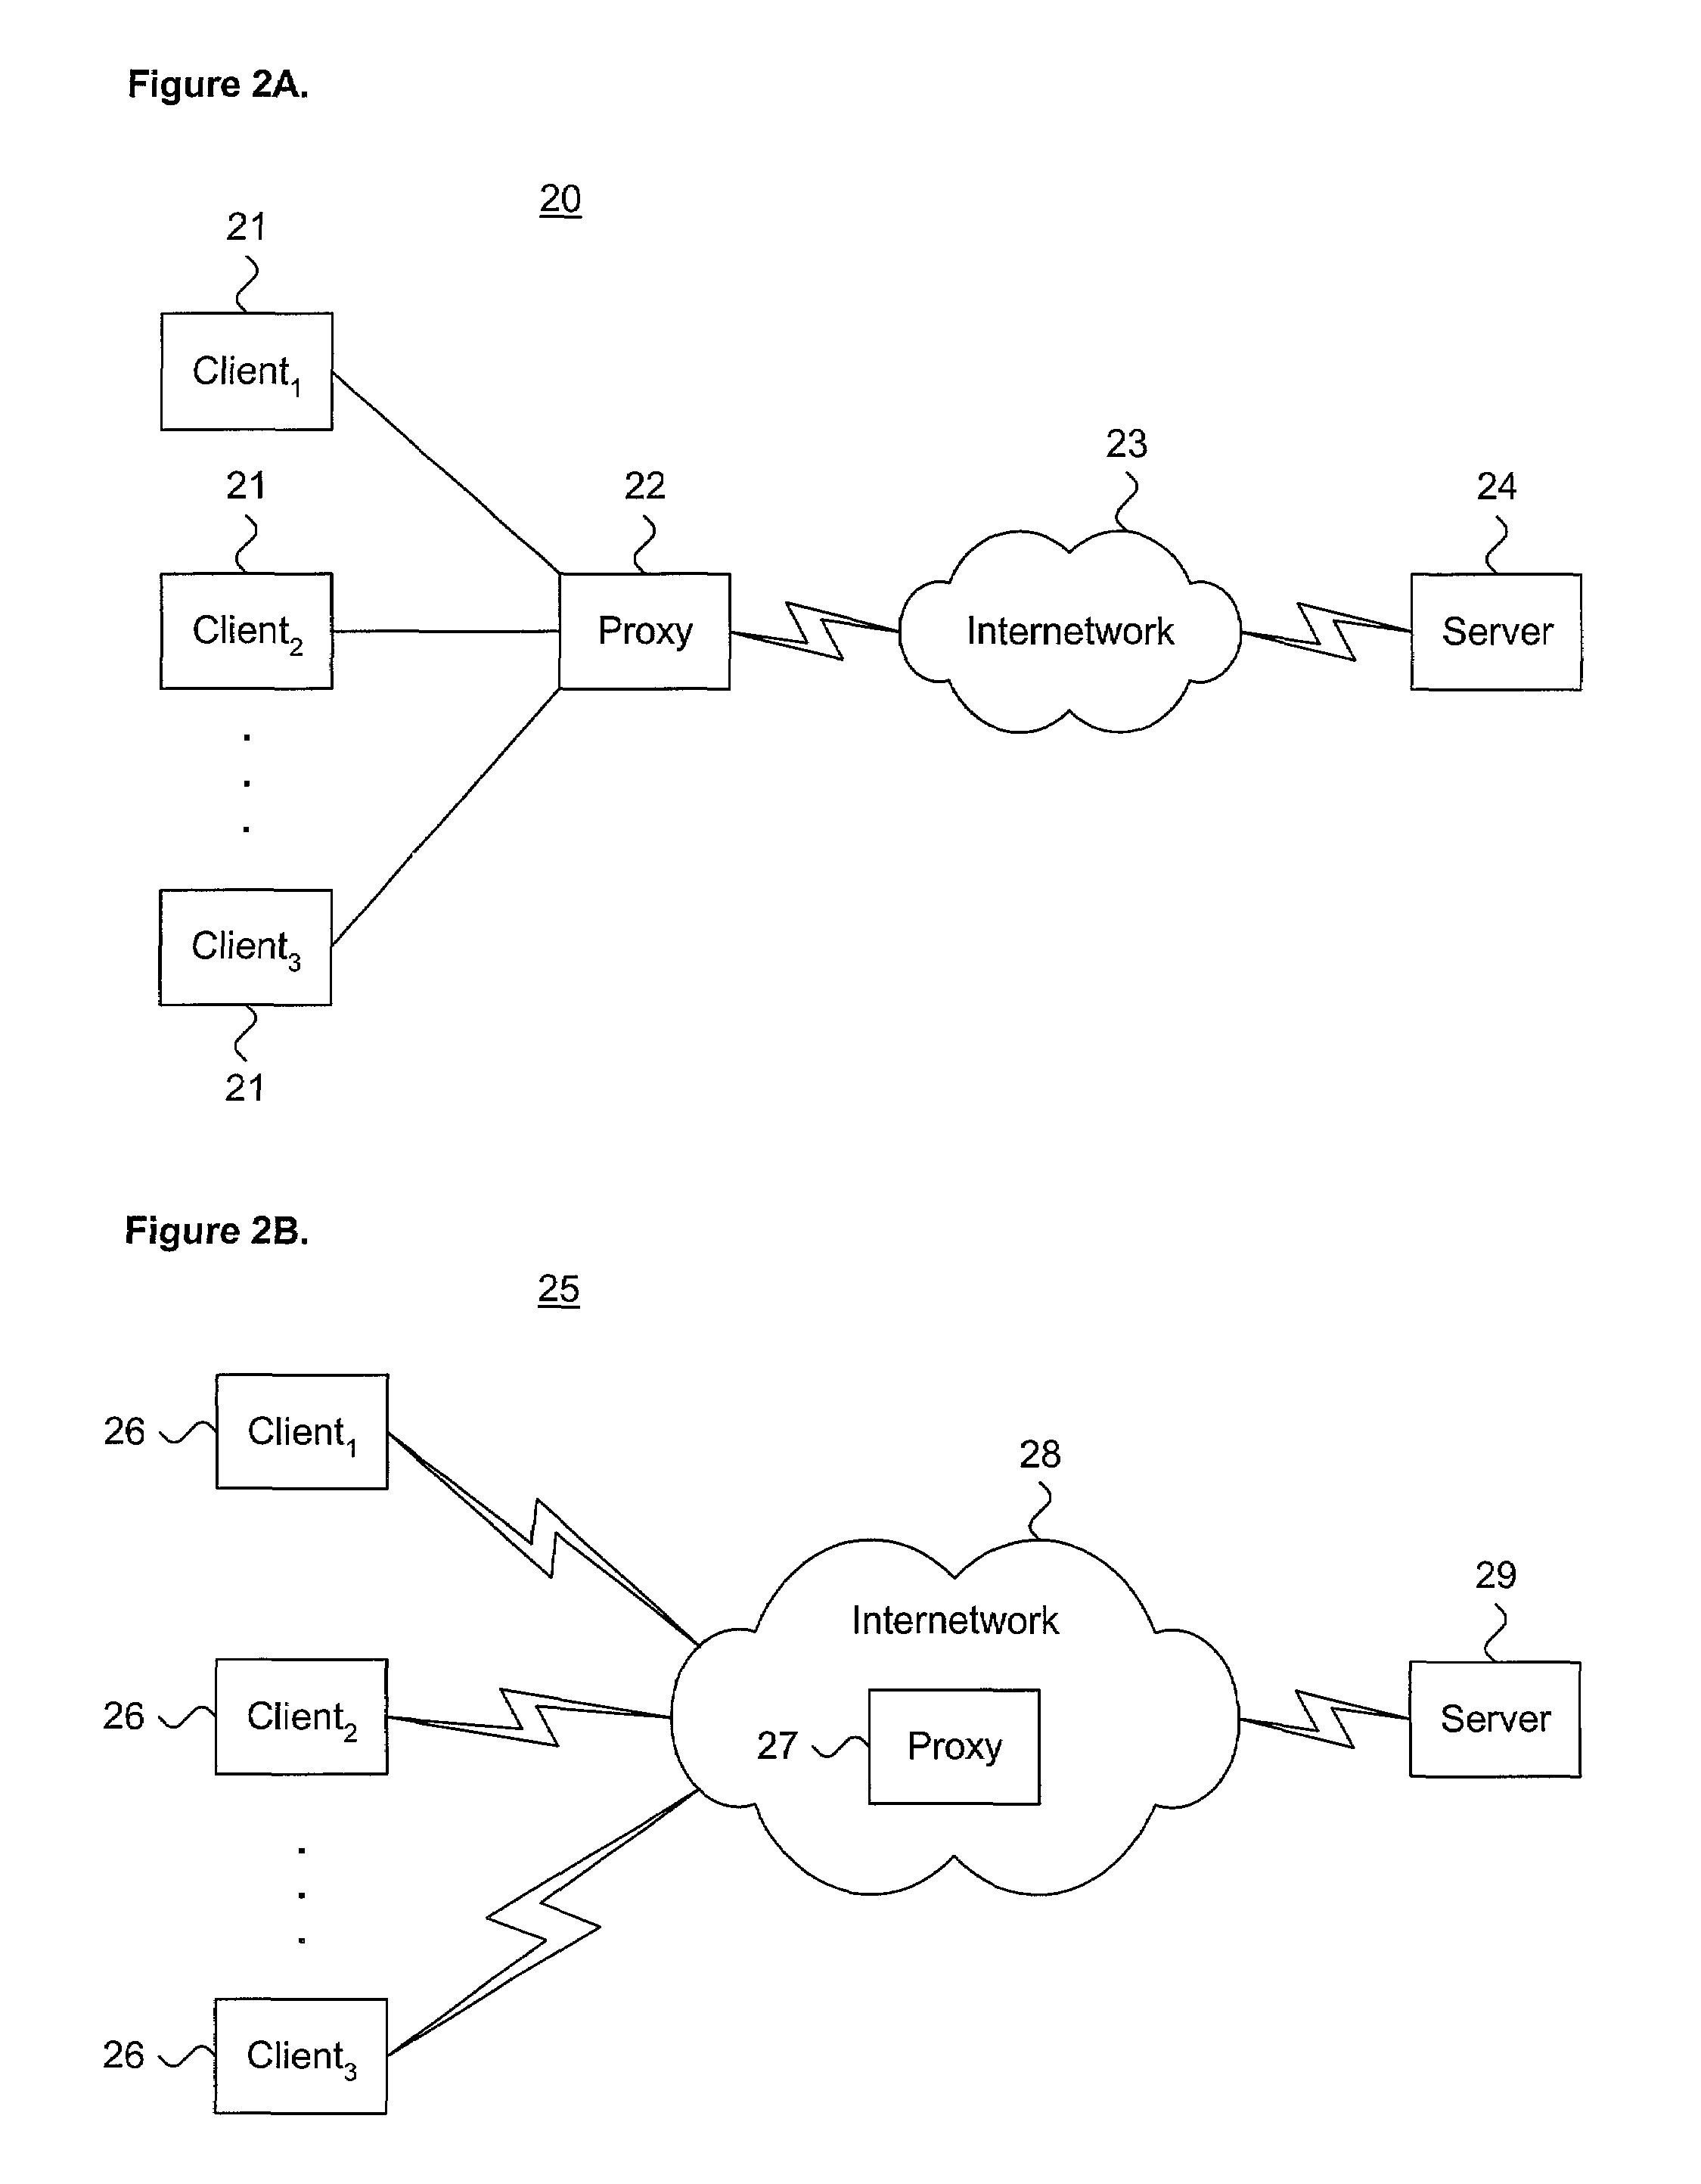 System and method for efficiently forwarding client requests from a proxy server in a TCP/IP computing environment